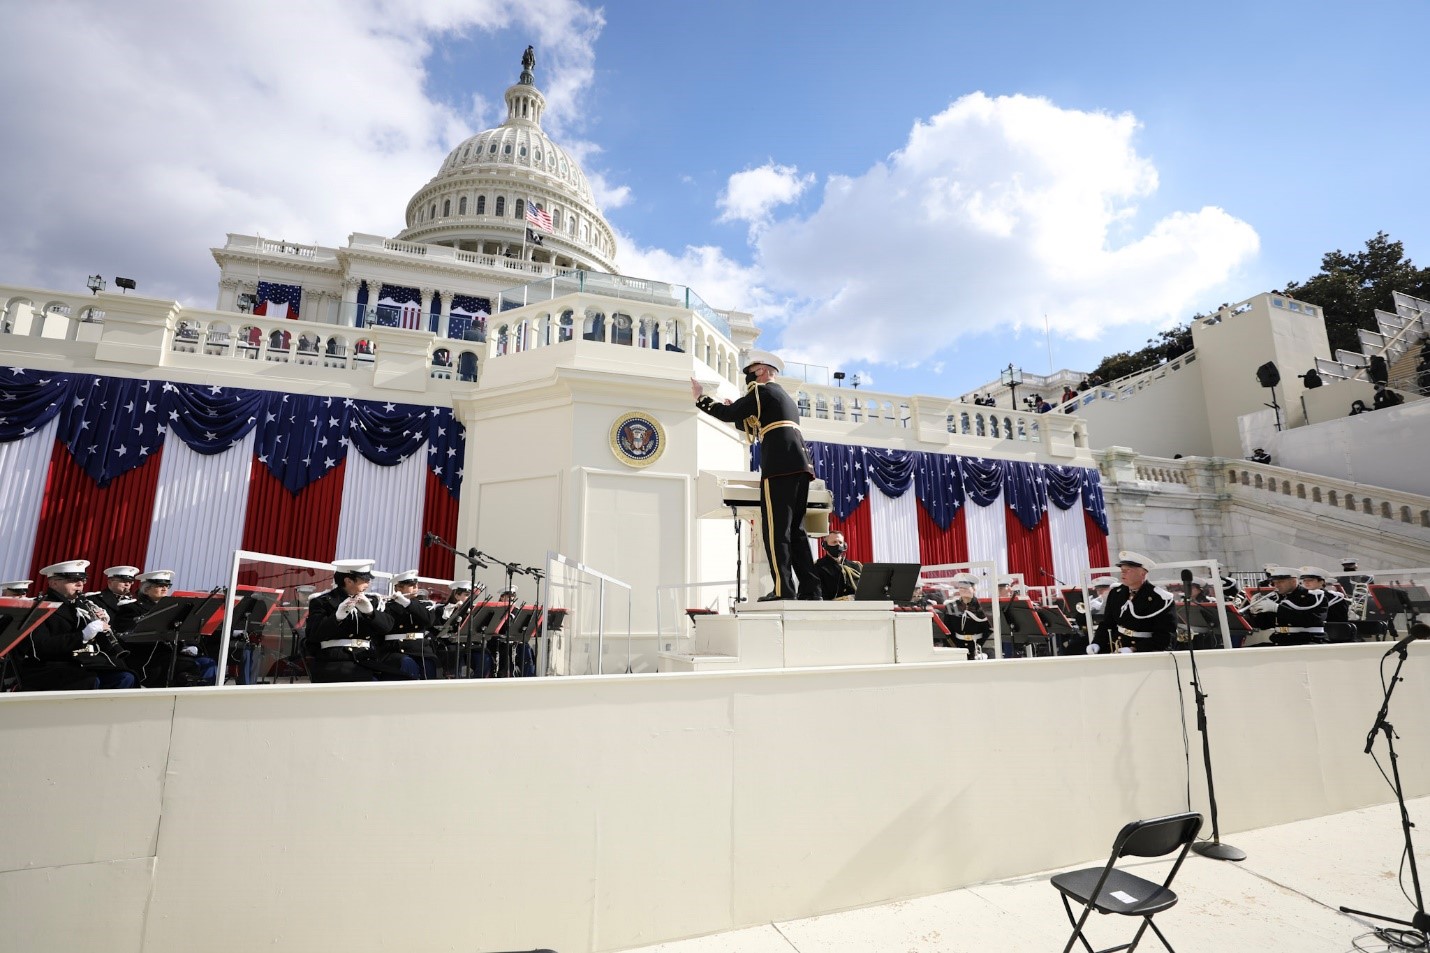 'The President's Own' United States Marine Band performs during the inauguration of President Joe Biden on January 20, 2021.